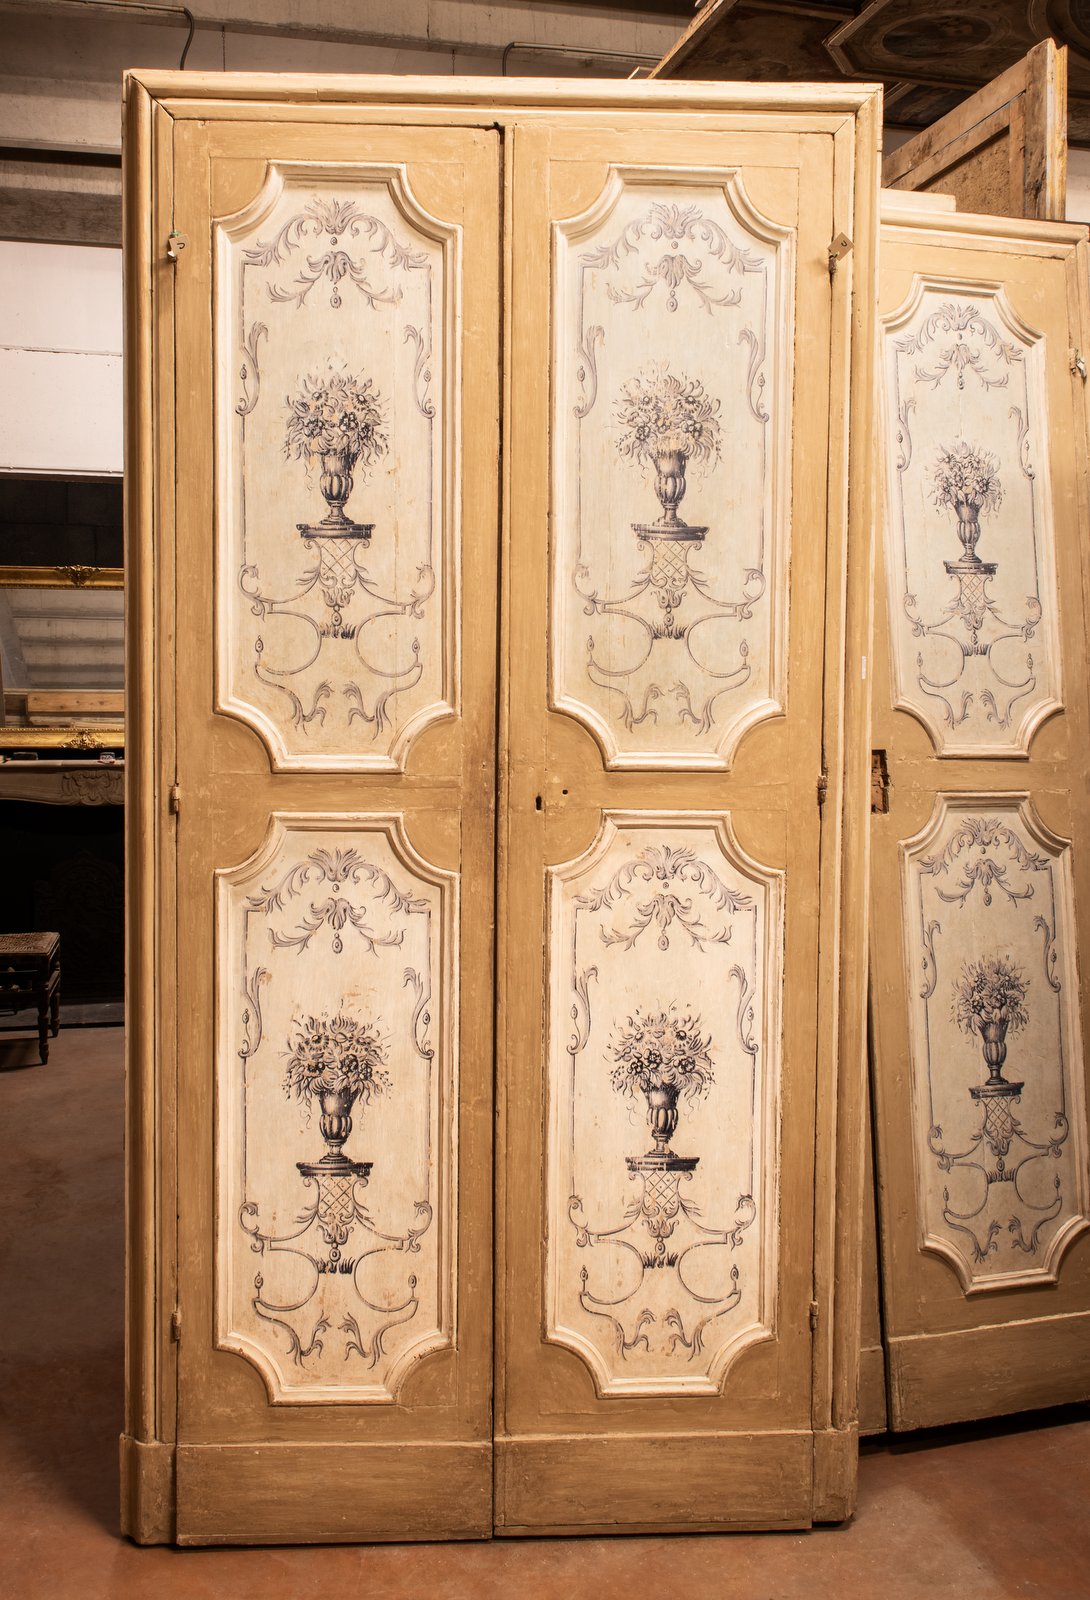 A pts707 - n. 7 painted doors, 18th century, cm l 130 x h 240/245